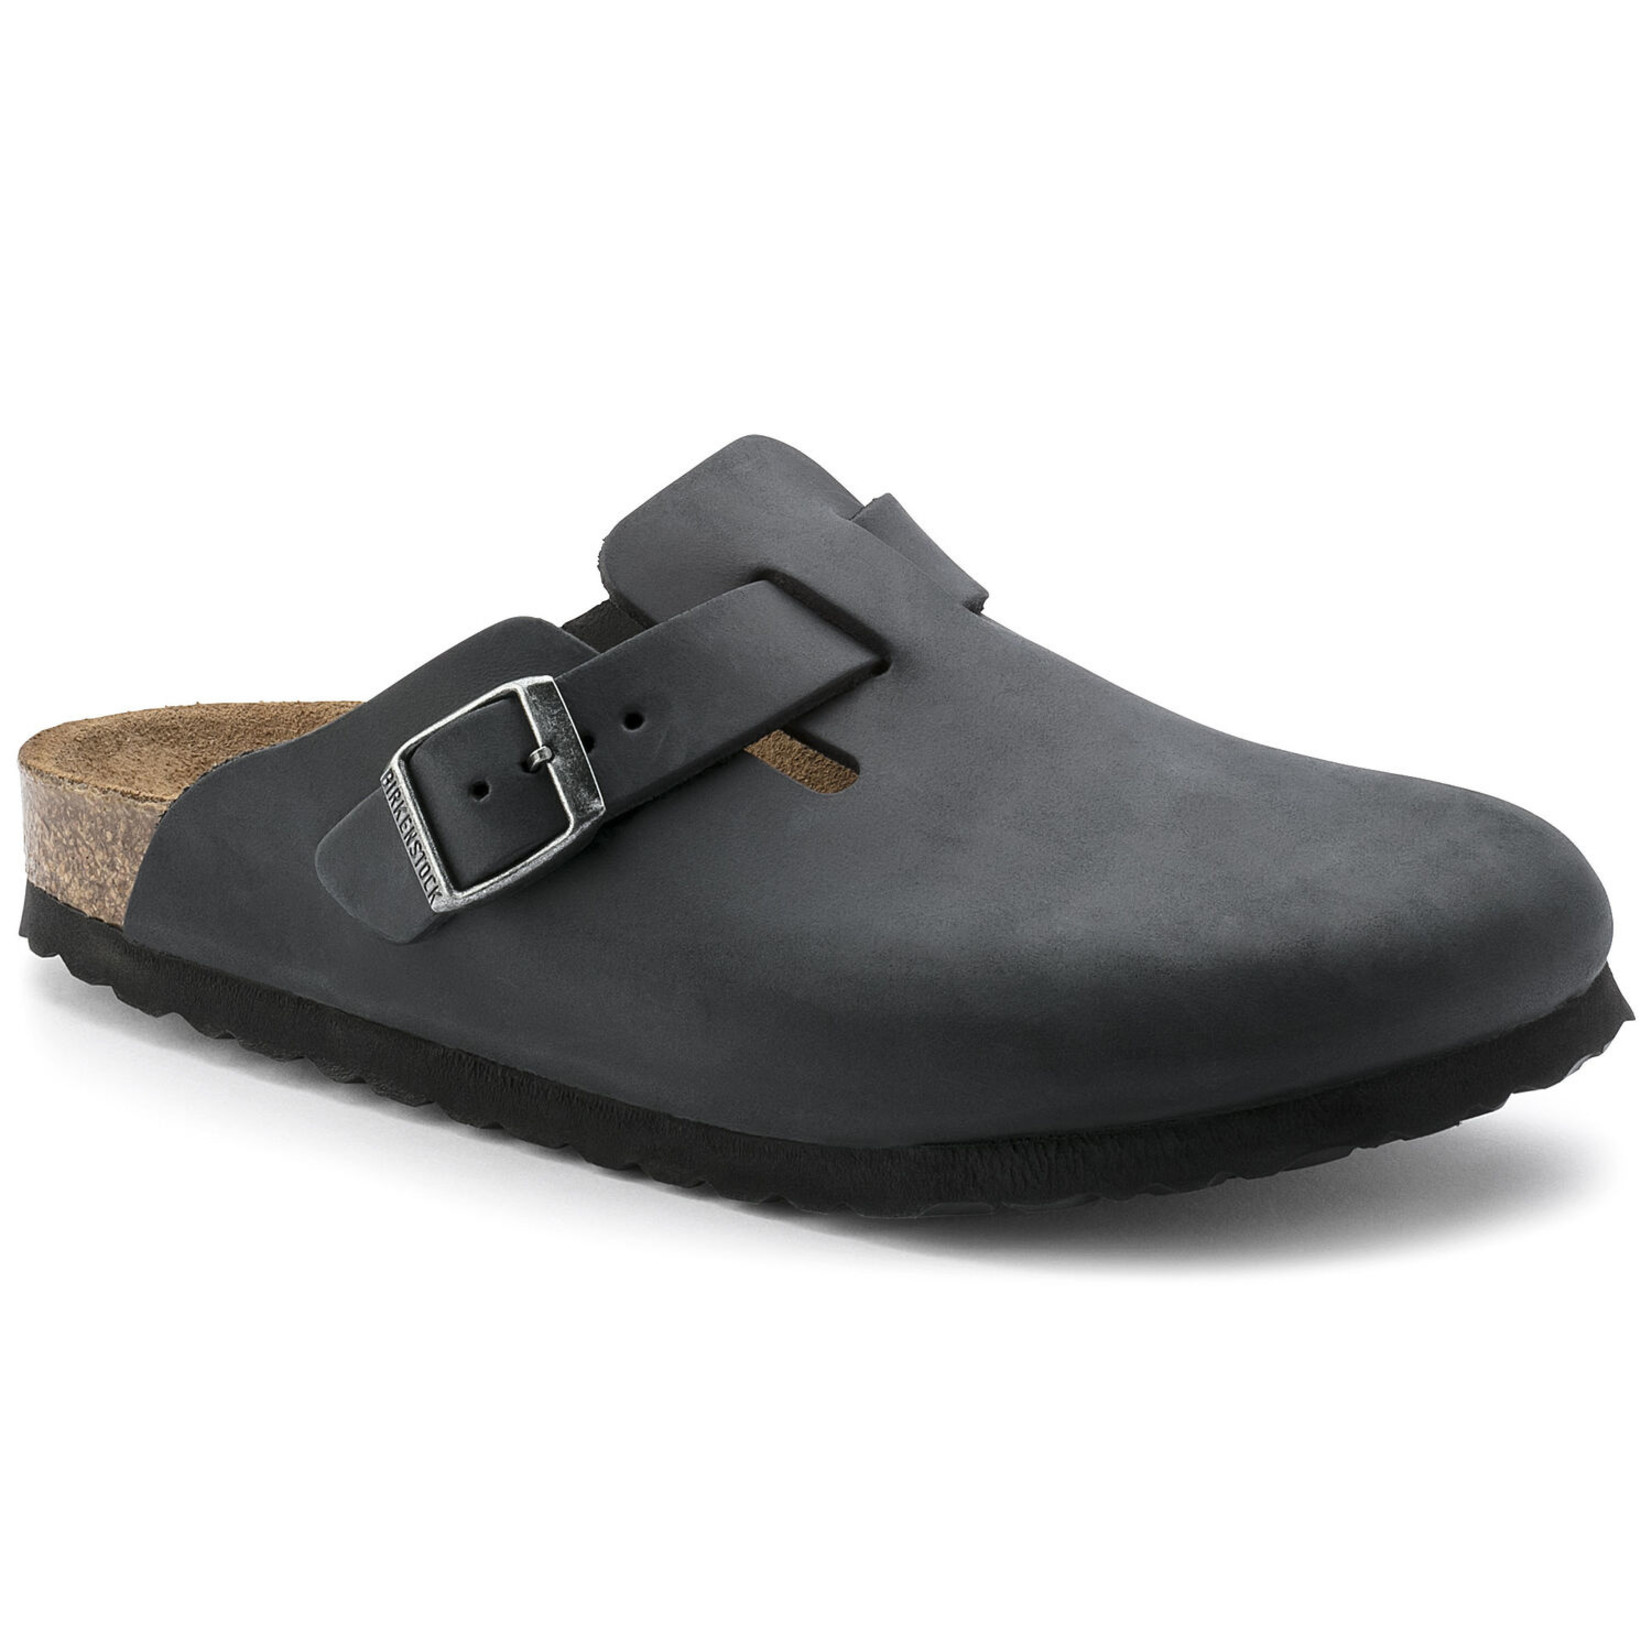 Birkenstock Boston BS Oiled Leather Clogs - Shippy Shoes